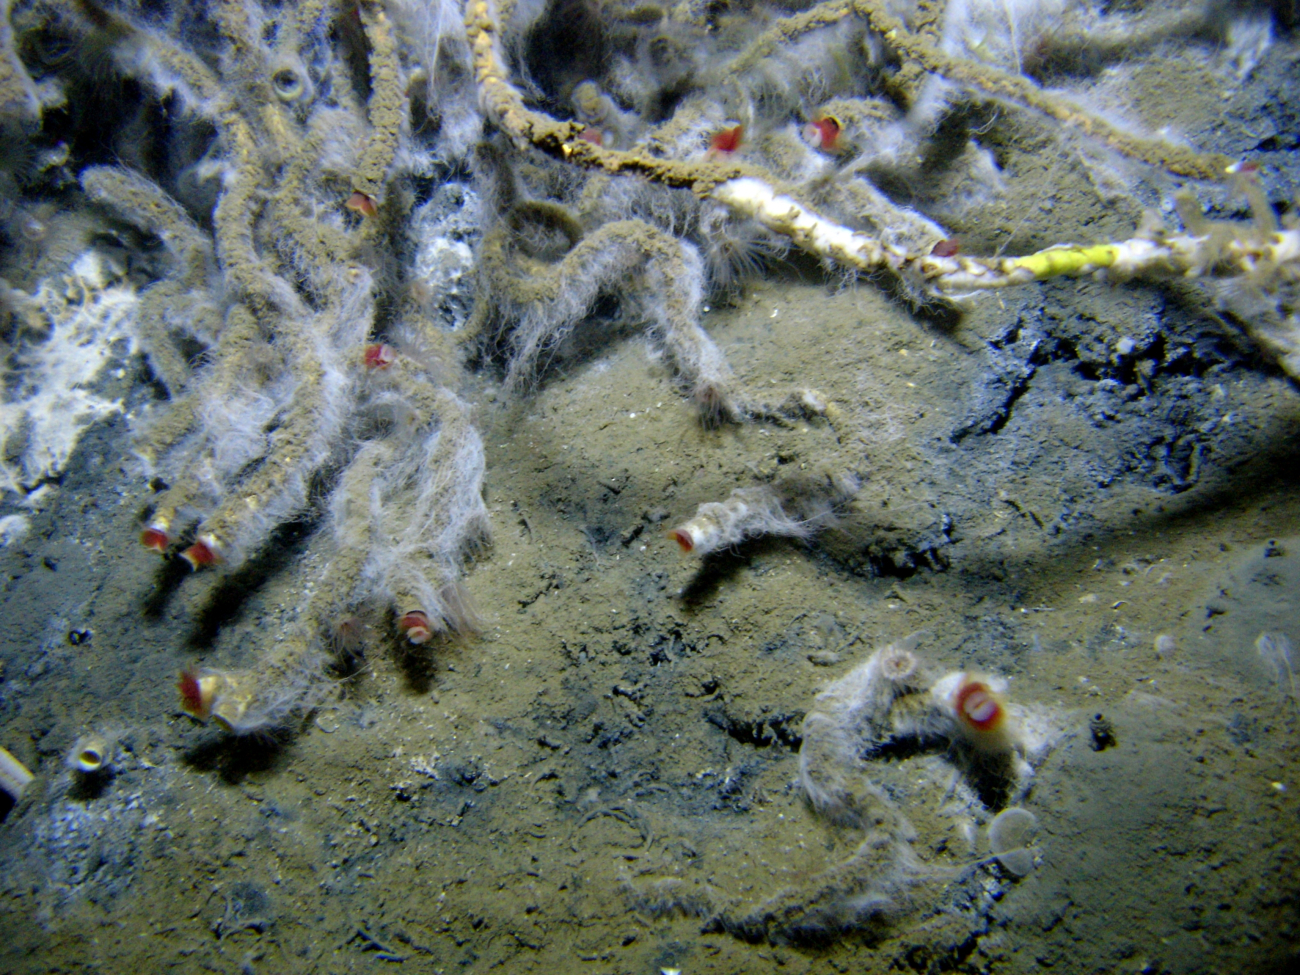 Lamellibrachian tube worms and filamentous white bacterial mat at a cold seepsite